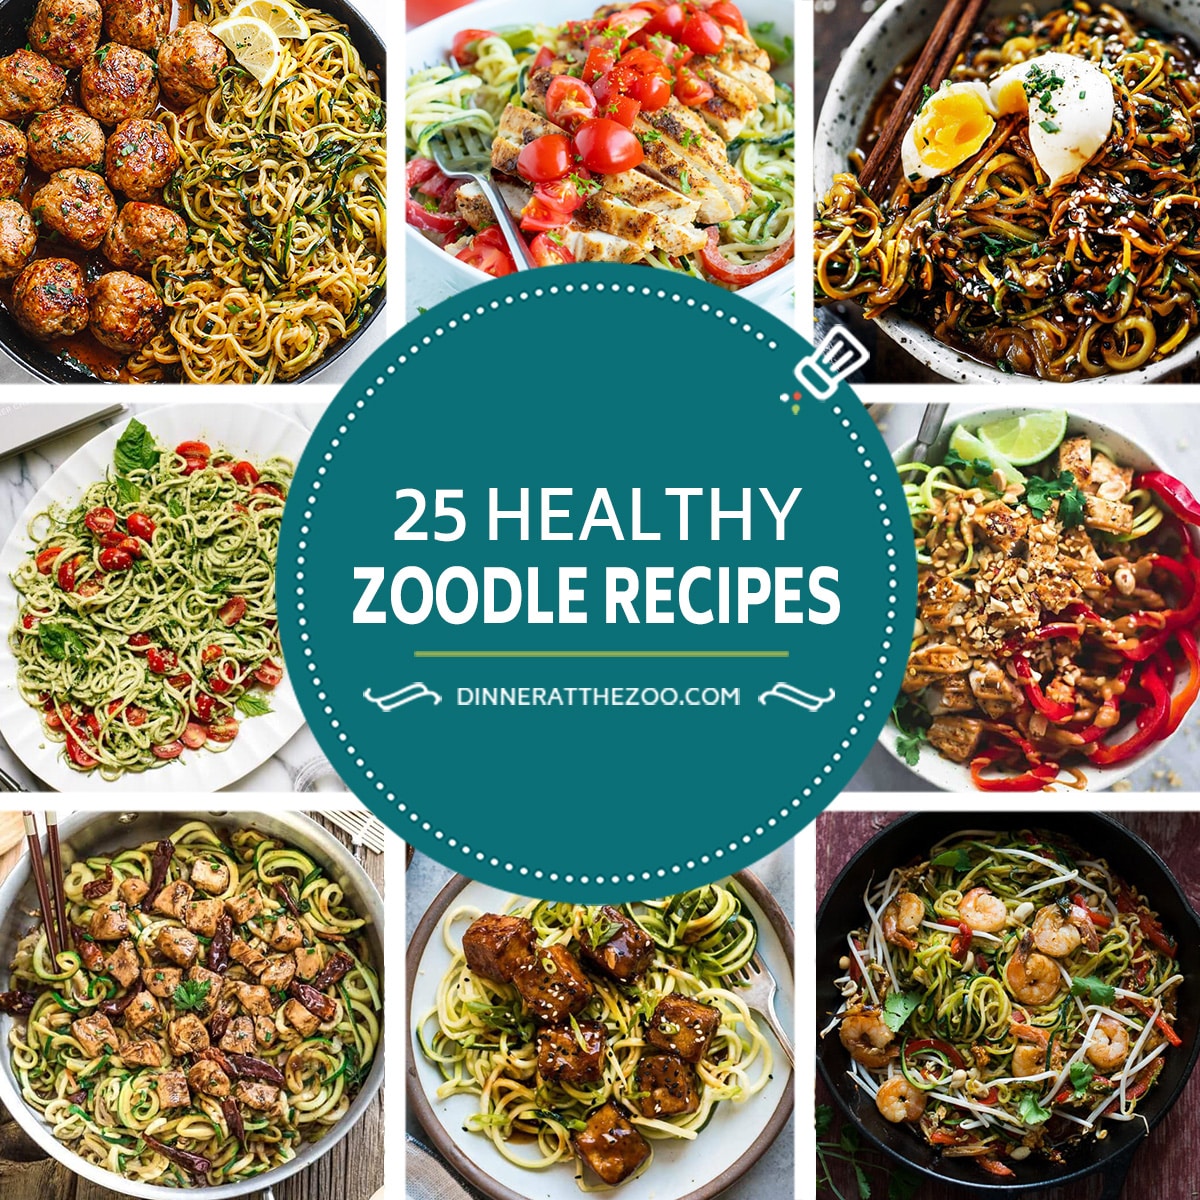 A group of healthy zoodle recipes such as pad thai zucchini noodles, crispy tofu zucchini noodles and kung pao chicken zoodles.